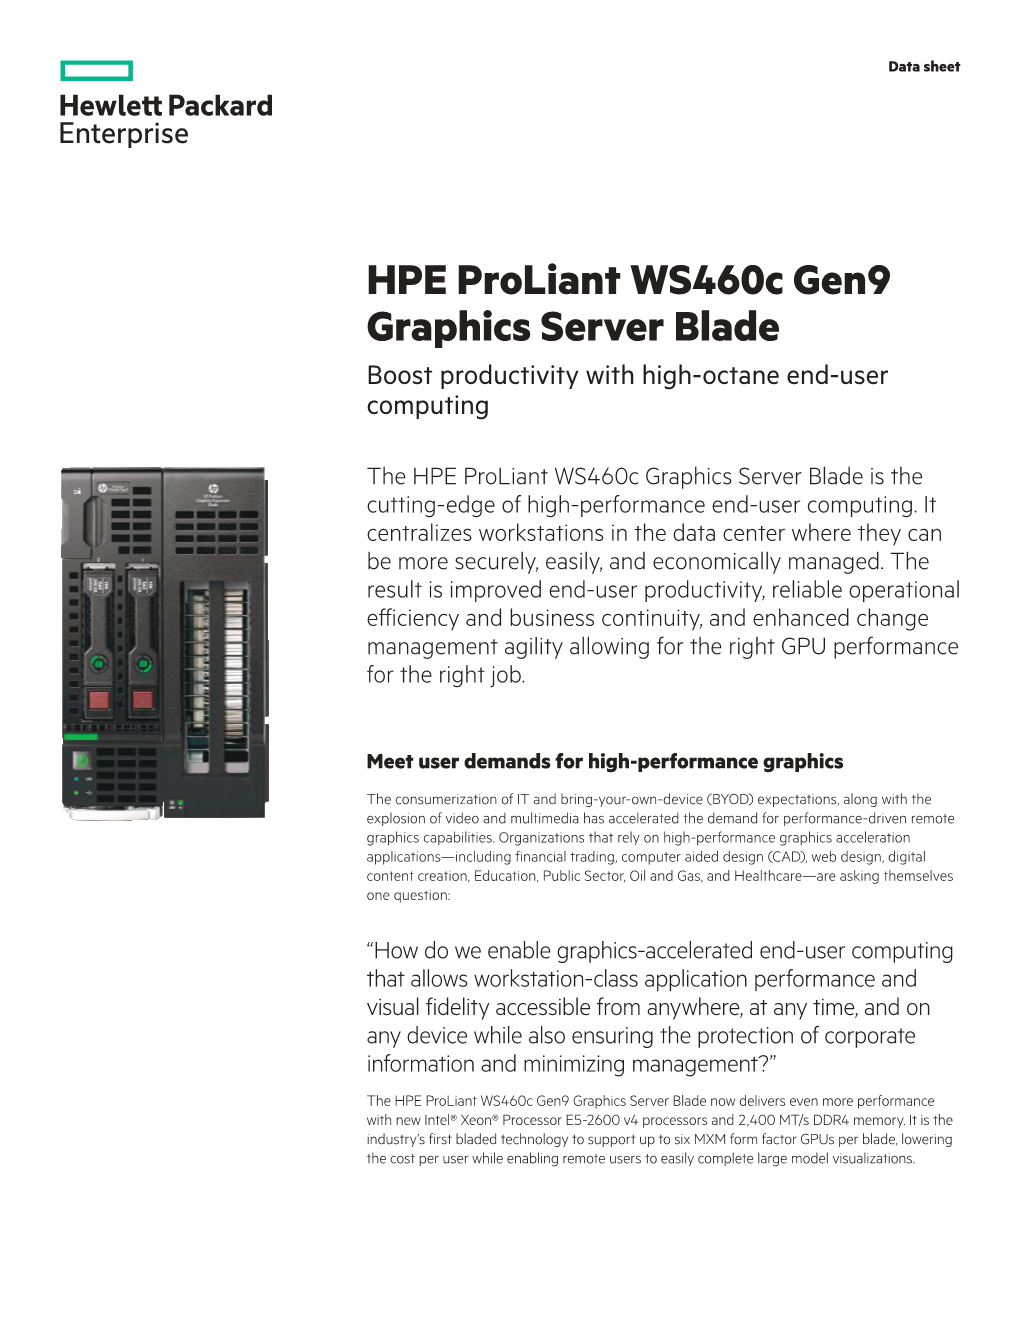 HPE Proliant Ws460c Gen9 Graphics Server Blade Boost Productivity with High-Octane End-User Computing Data Sheet